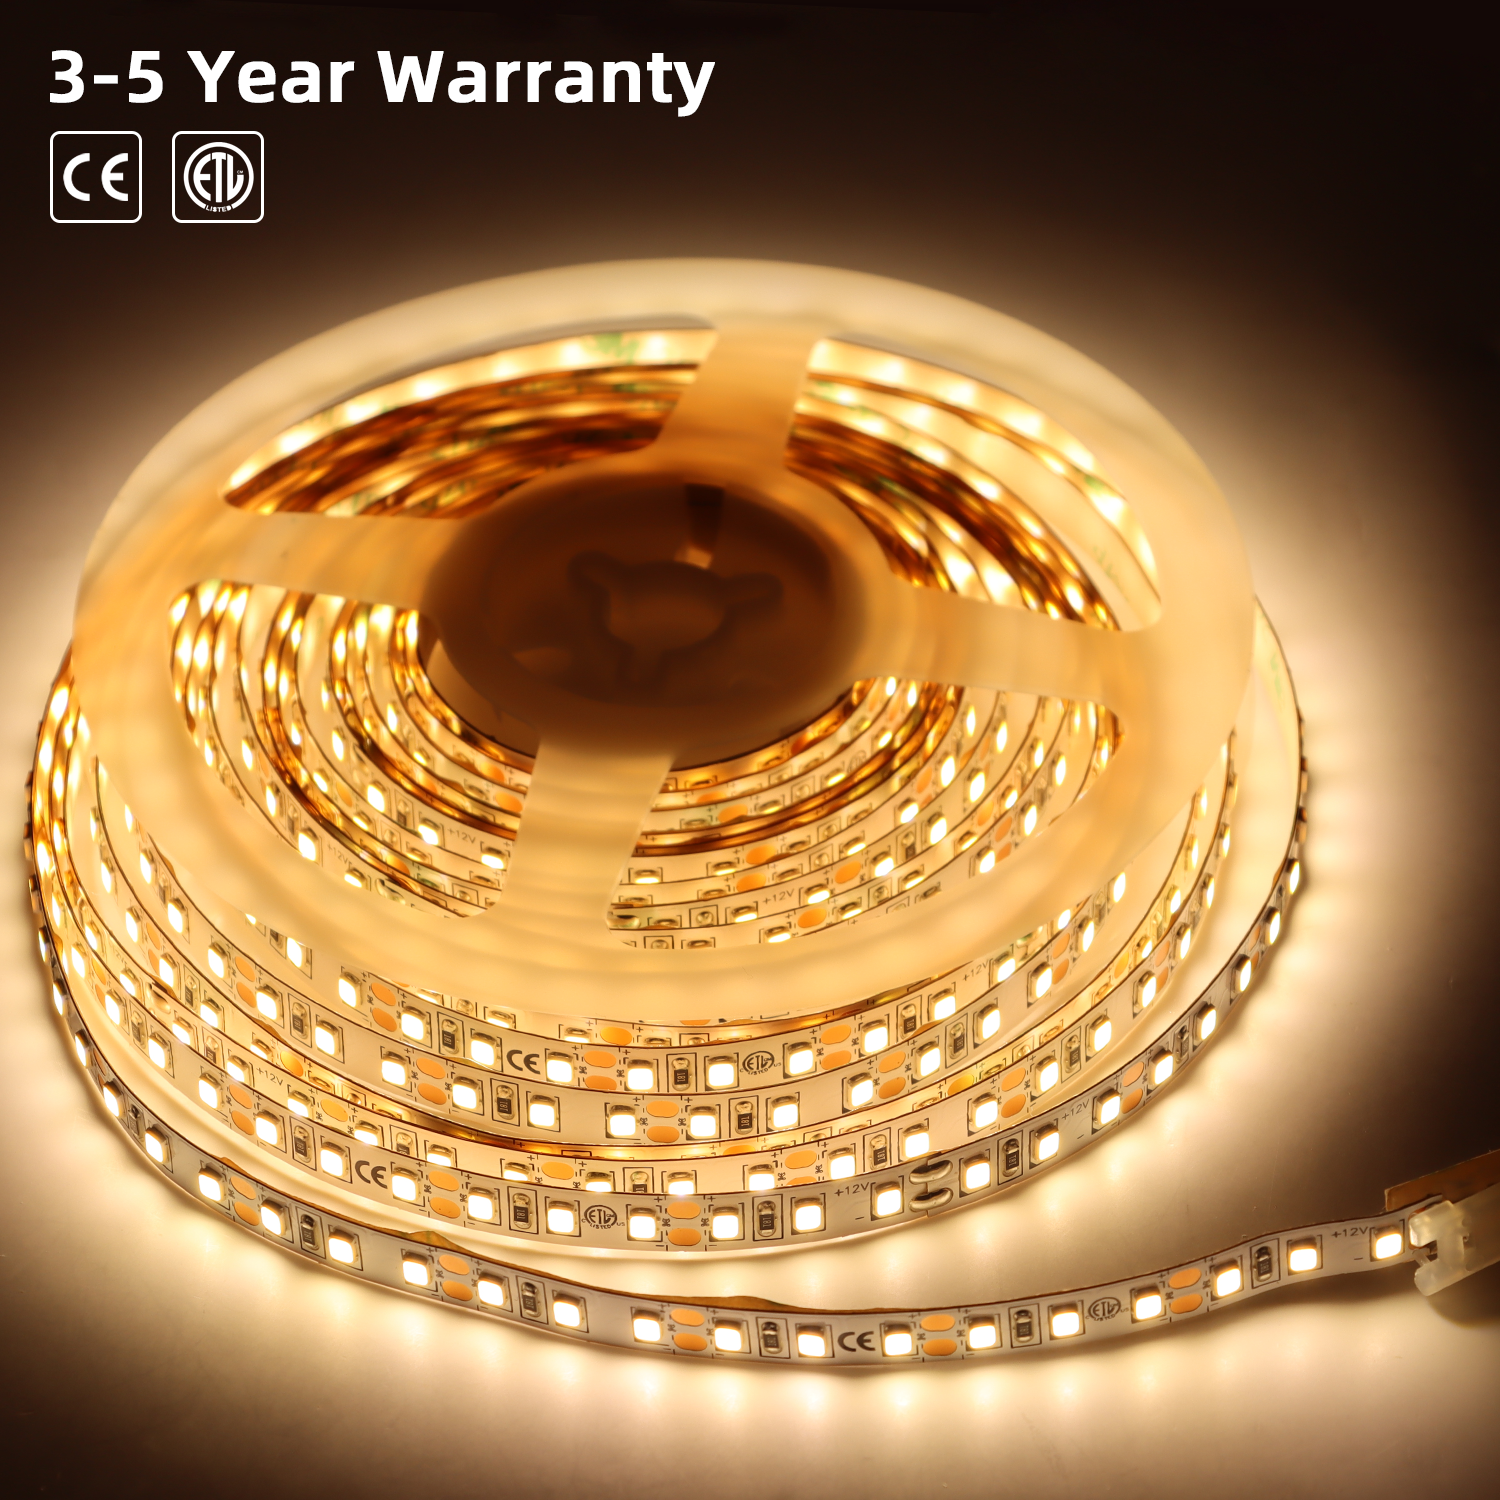 Send inquiry for 12V Warm White LED Strip Light Wideth 8mm Under Cabinet Tape Lighting with ETL, CE for Living Room, Bedroom to high quality LED Strip Light supplier. Wholesale Under Cabinet Tape Lighting directly from China LED Strip Light manufacturers/exporters. Get a factory sale price list and become a distributor/agent-vstled.com